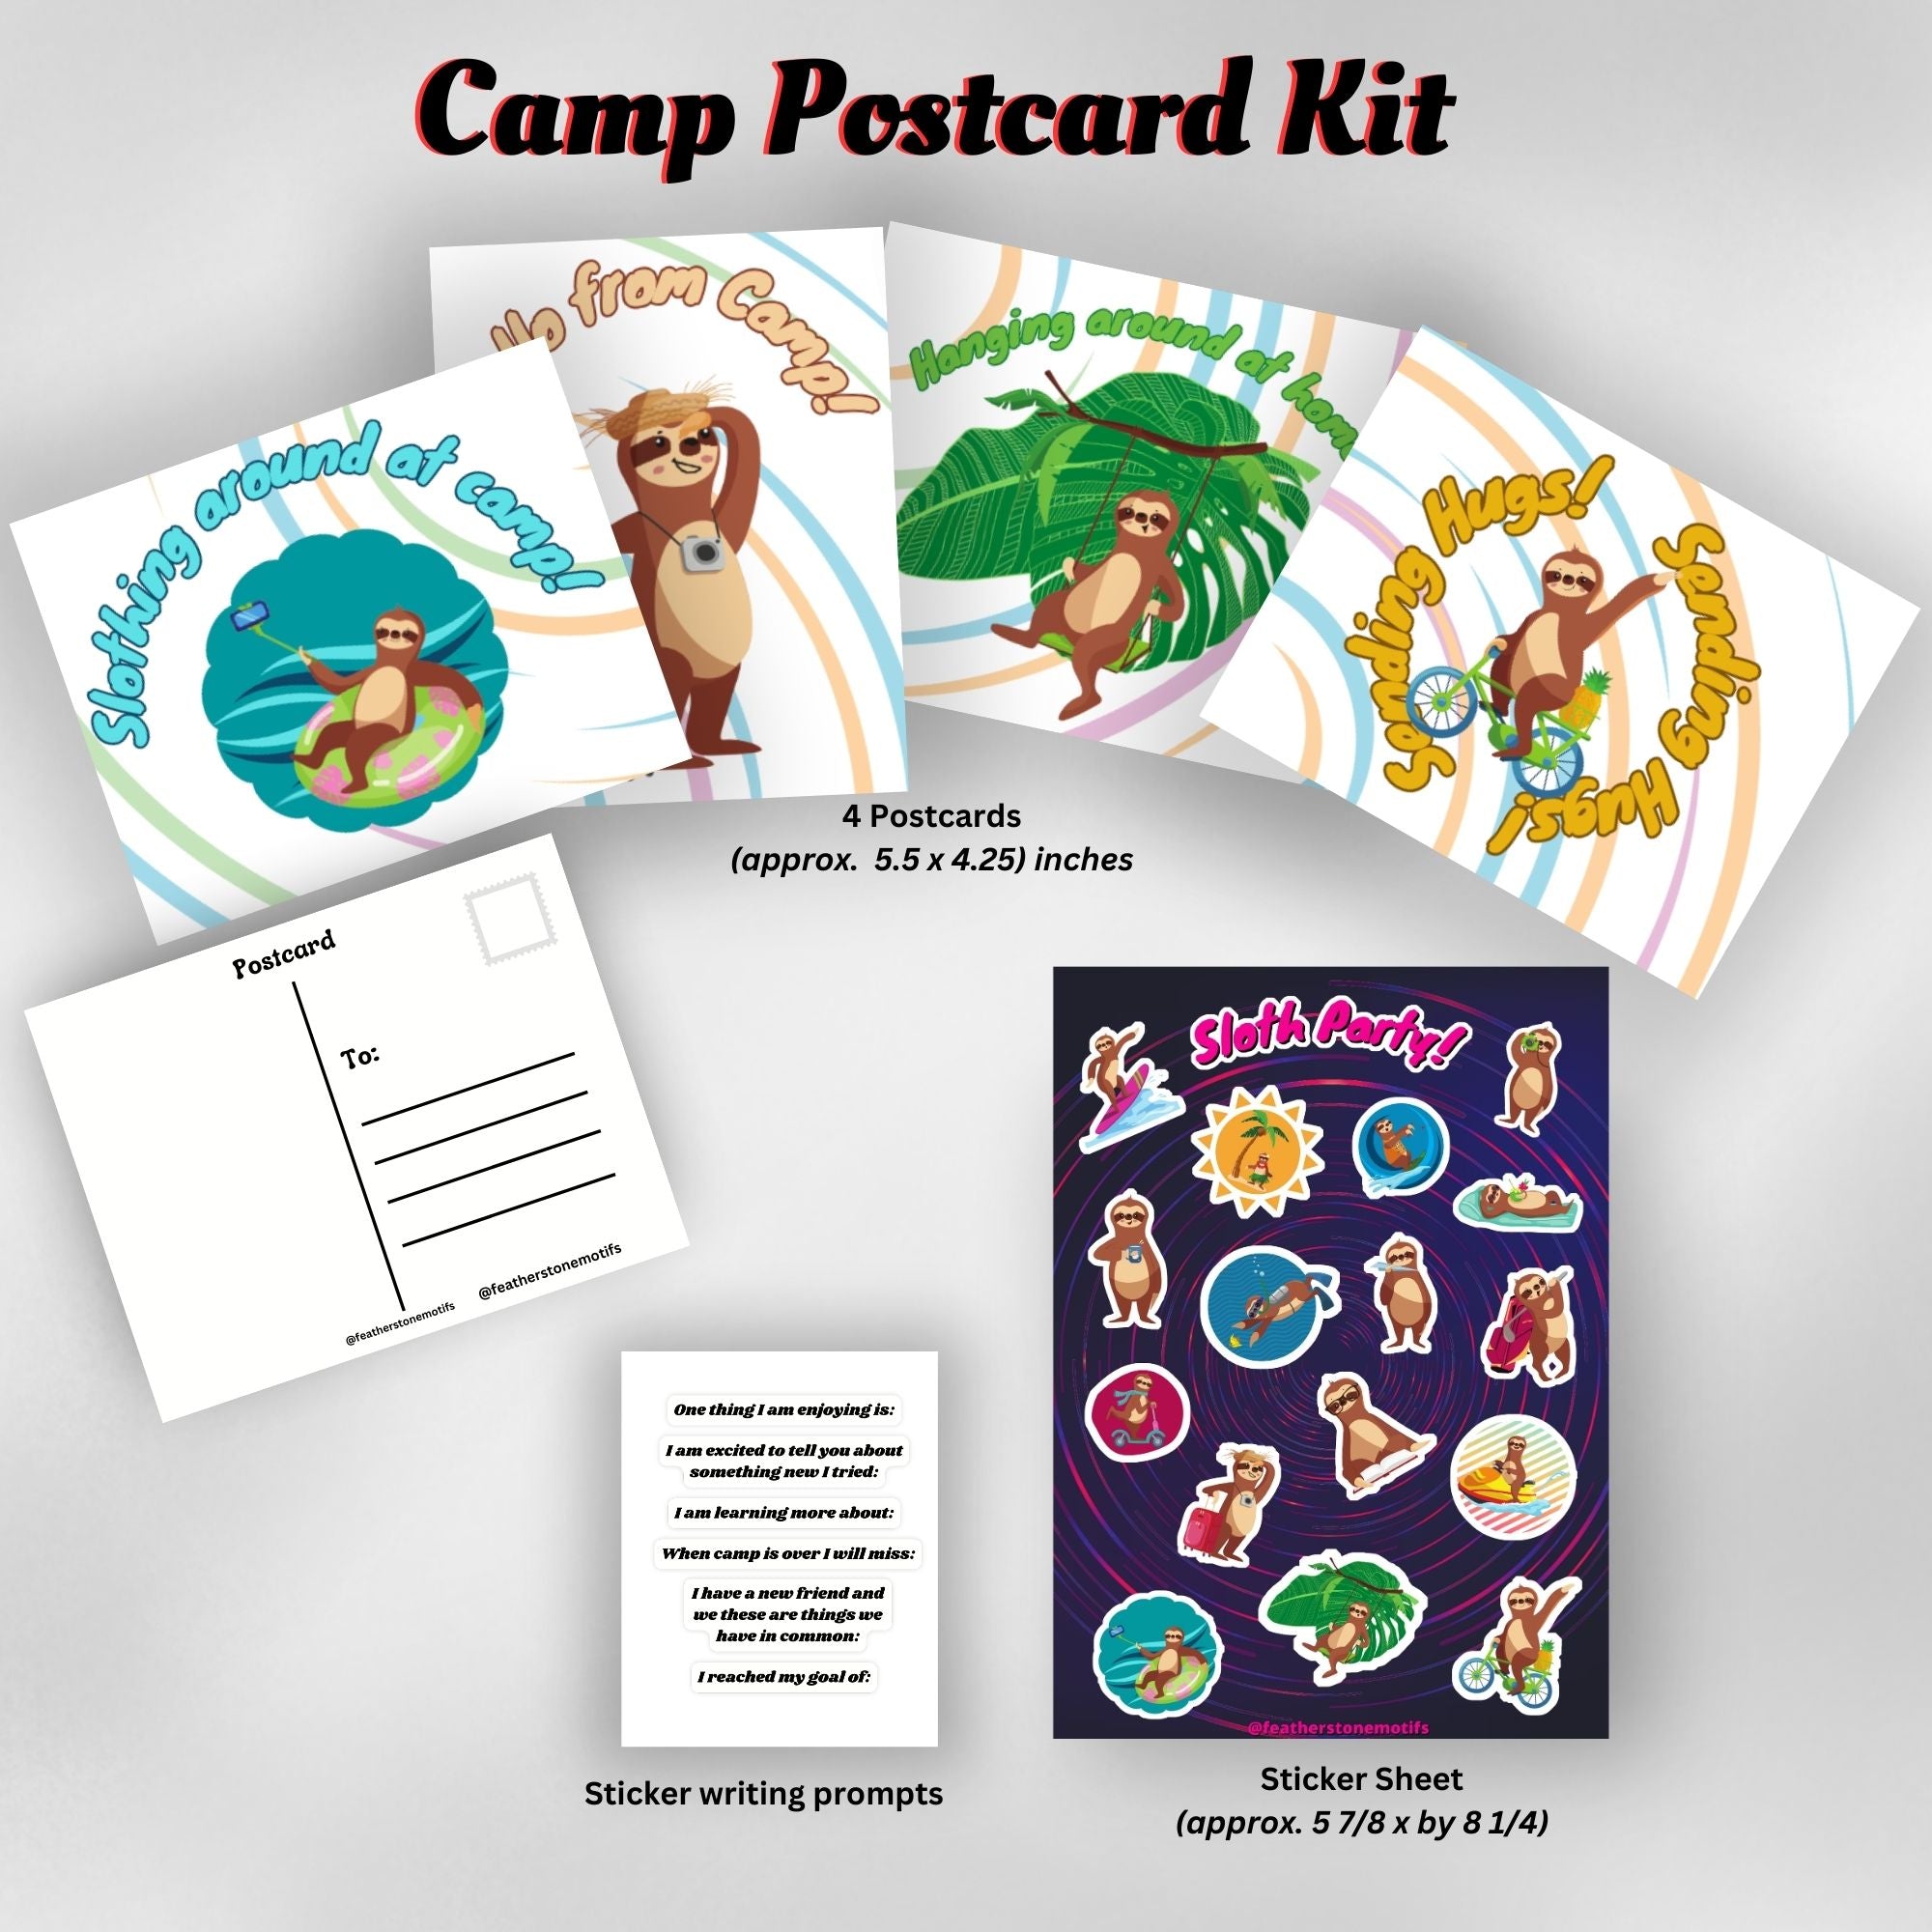 This image shows the Sloth themed Camp Postcard Kit with dimensions and descriptions for each item.